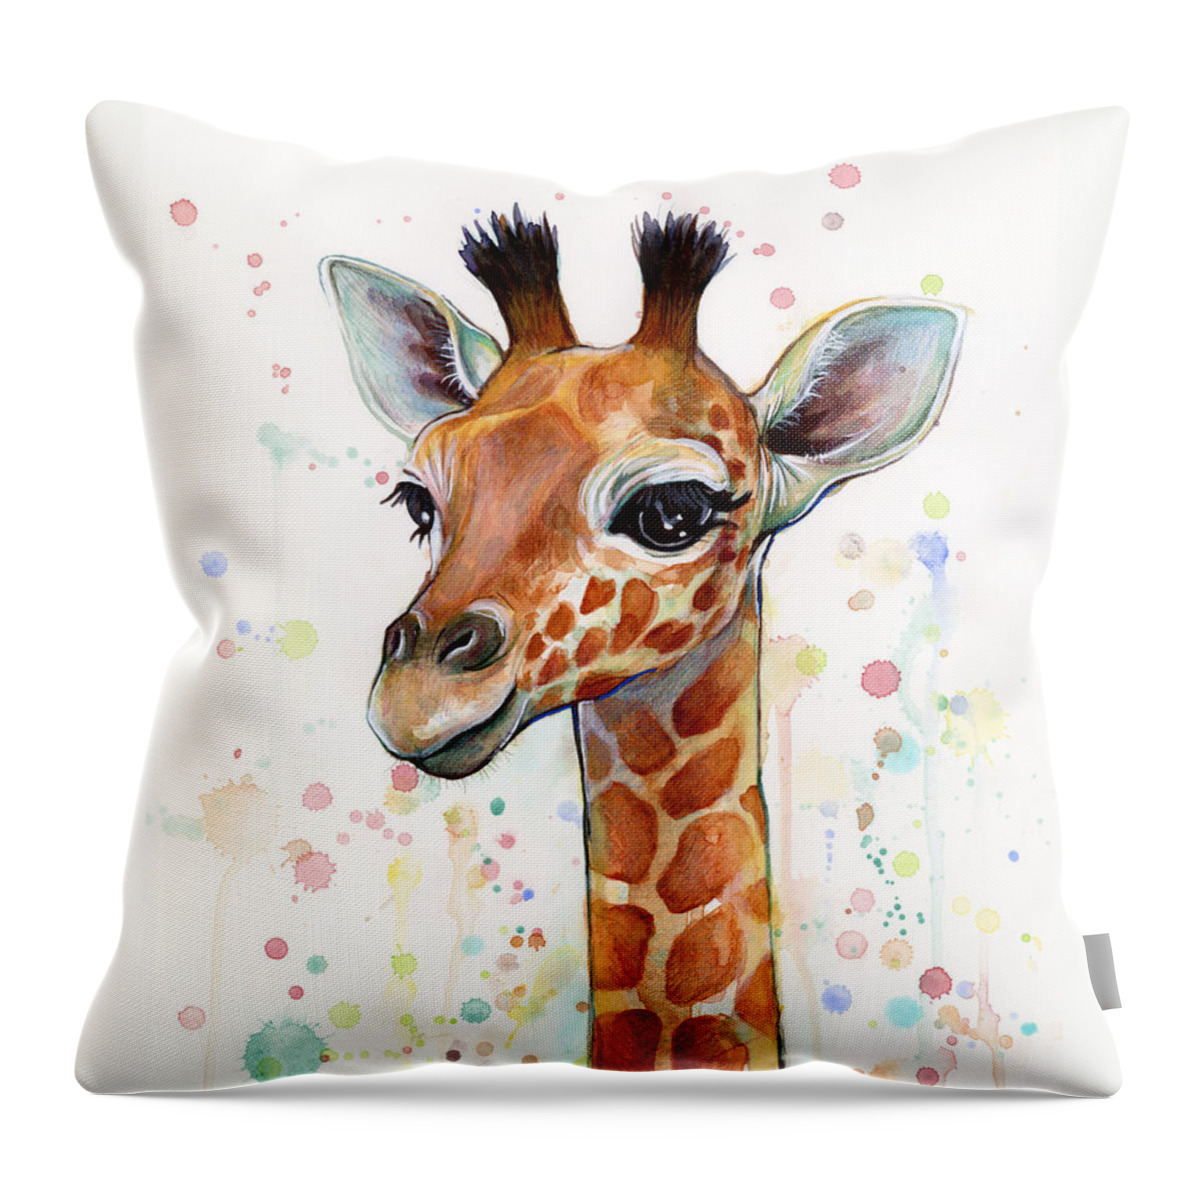 Watercolor Throw Pillow featuring the painting Baby Giraffe Watercolor by Olga Shvartsur